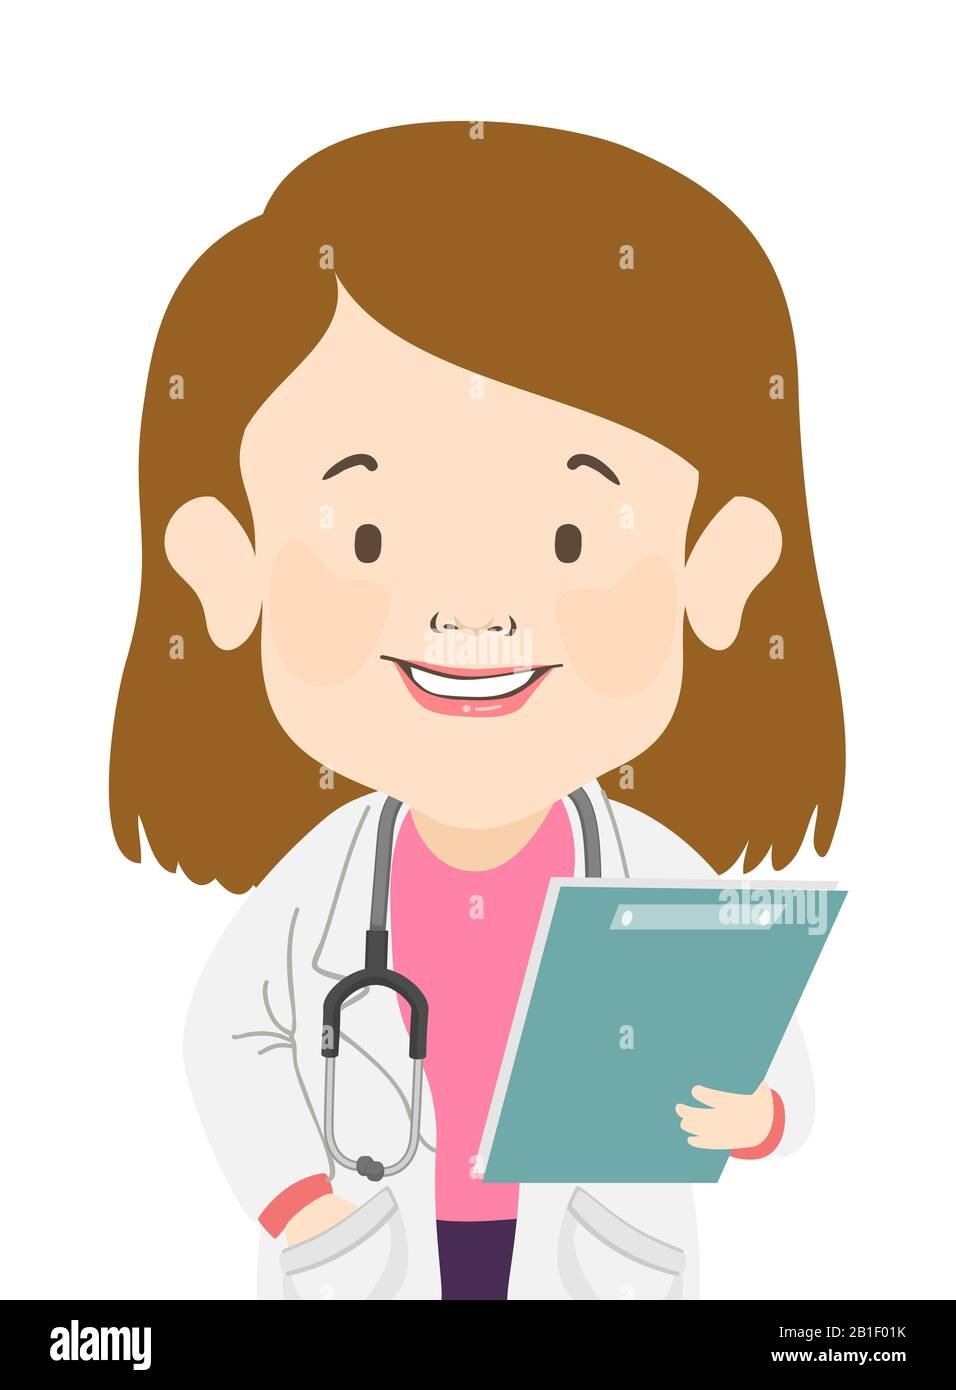 Illustration of a Doctor Girl with Dwarfism Wearing White Gown and Stethoscope, Holding Clipboard Stock Photo